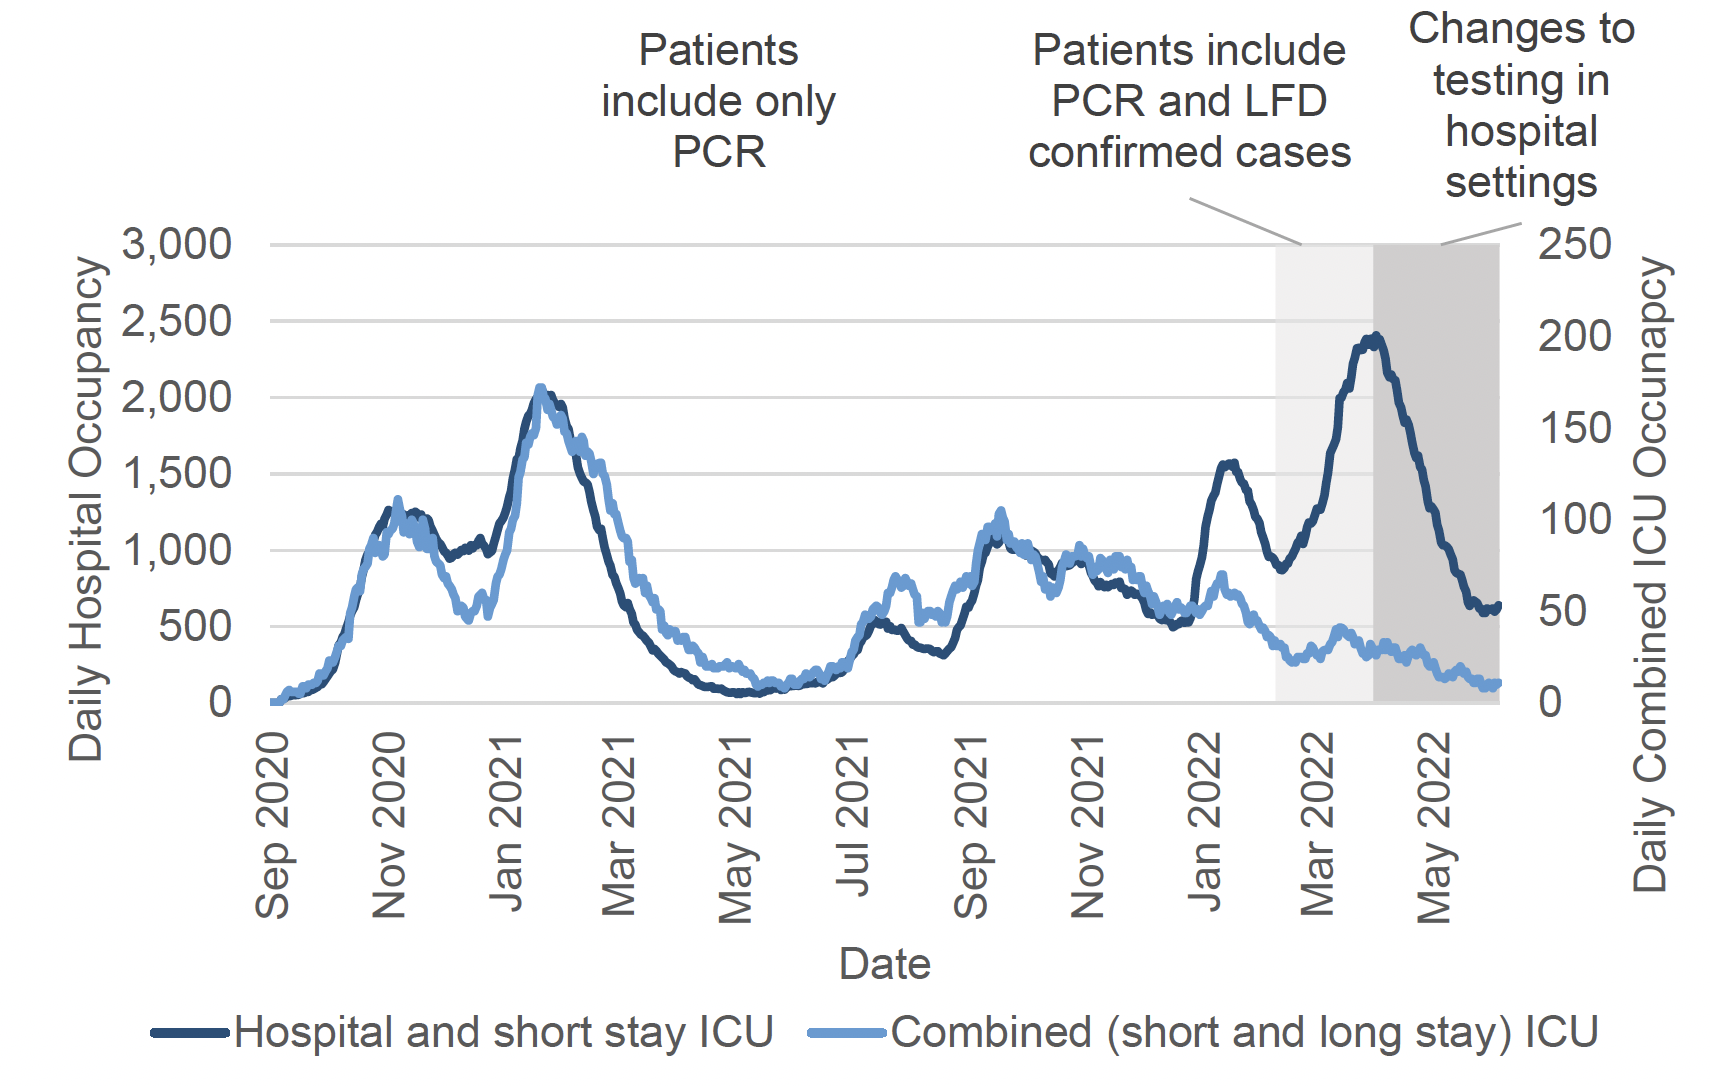 A line chart showing one line with the daily hospital occupancy (including short stay ICU) against the left axis and a line with ICU/HDU (including long and short stay) against the right axis, with recently confirmed Covid-19 between September 2020 and early June 2022. The number of Covid-19 patients in hospital peaked in November 2020, January 2021, July 2021, September 2021, January 2022, and early April 2022. The number of Covid ICU patients peaked in November 2020, January 2021, September 2021, January 2022 and mid-March 2022. The chart has notes explaining that before 9 February 2022, patients were only included if they had a recent positive laboratory confirmed PCR test. After 9 February, both PCR and LFD confirmed cases were included. Patient testing requirements changed on the 1 April 2022, which may mean a reduction in asymptomatic cases of Covid-19 detected and a corresponding decrease in Covid-19 related occupancy. In addition, from 1 May 2022, testing changed from asymptomatic population-wide testing, to targeted testing for clinical care and surveillance. Therefore data should be interpreted with caution and over time comparison should be avoided.